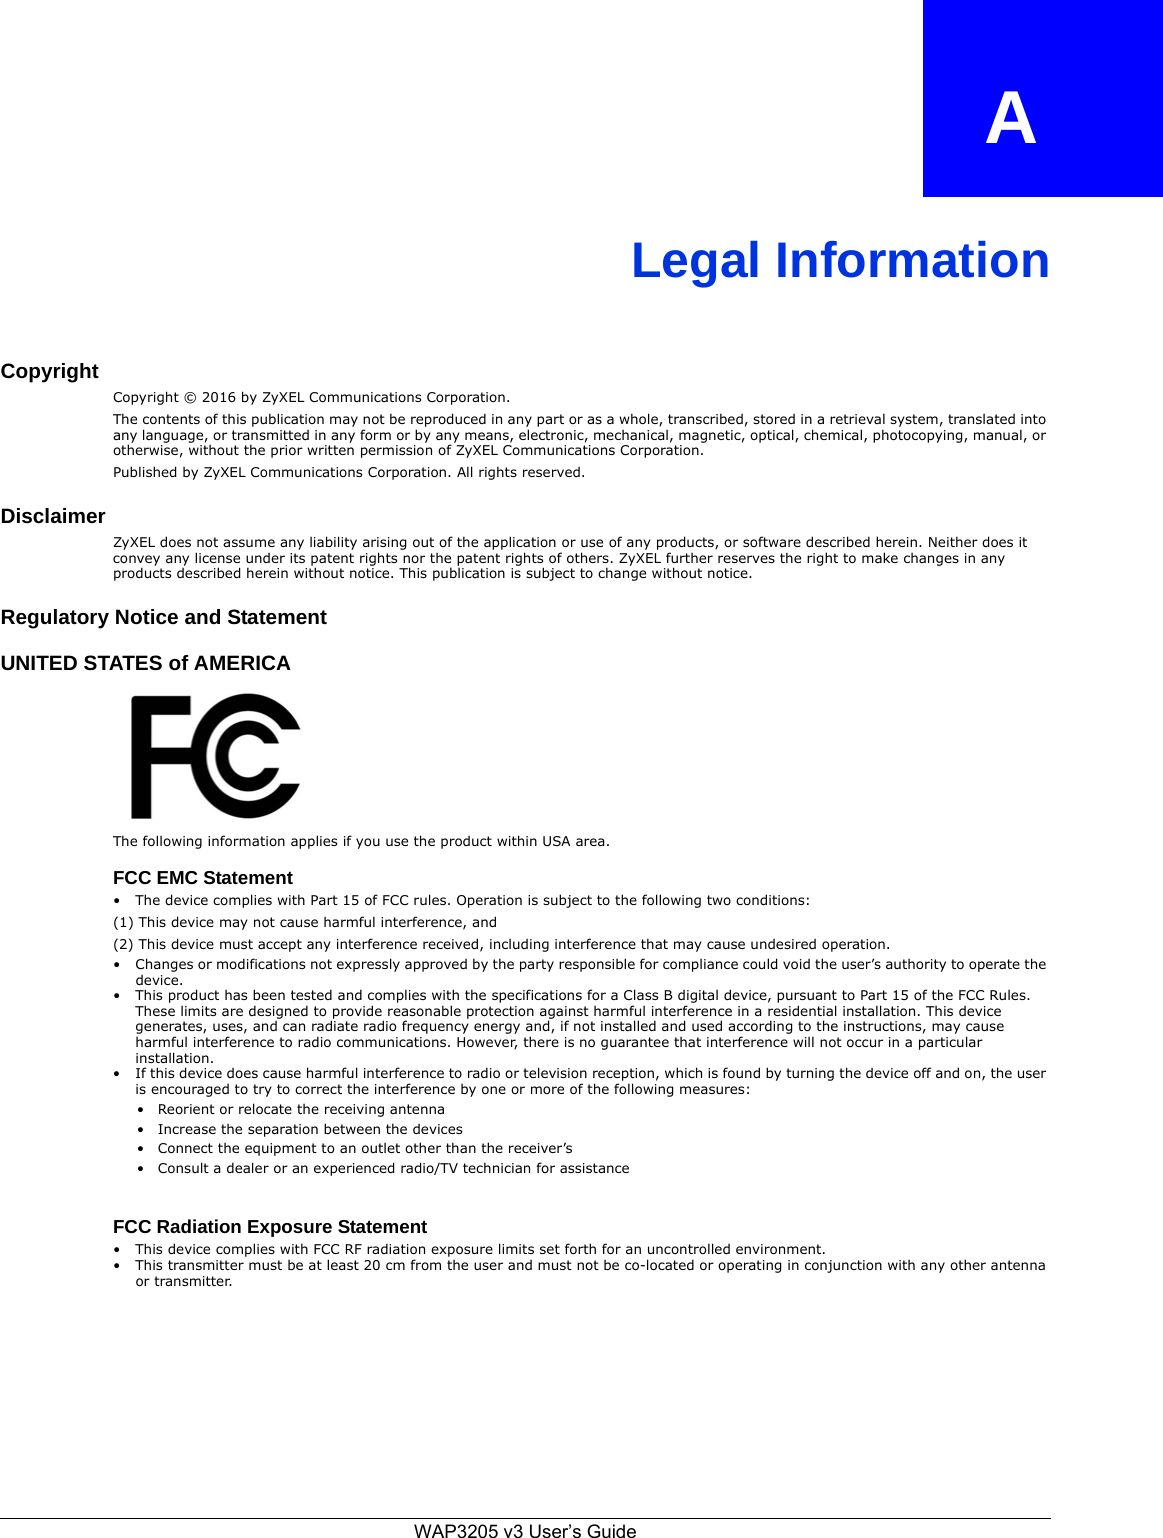 APPENDIX   ALegal InformationCopyrightCopyright © 2016 by ZyXEL Communications Corporation.The contents of this publication may not be reproduced in any part or as a whole, transcribed, stored in a retrieval system, translated into any language, or transmitted in any form or by any means, electronic, mechanical, magnetic, optical, chemical, photocopying, manual, or otherwise, without the prior written permission of ZyXEL Communications Corporation.Published by ZyXEL Communications Corporation. All rights reserved.DisclaimerZyXEL does not assume any liability arising out of the application or use of any products, or software described herein. Neither does it convey any license under its patent rights nor the patent rights of others. ZyXEL further reserves the right to make changes in any products described herein without notice. This publication is subject to change without notice.Regulatory Notice and StatementUNITED STATES of AMERICAThe following information applies if you use the product within USA area.FCC EMC Statement• The device complies with Part 15 of FCC rules. Operation is subject to the following two conditions:(1) This device may not cause harmful interference, and (2) This device must accept any interference received, including interference that may cause undesired operation.• Changes or modifications not expressly approved by the party responsible for compliance could void the user’s authority to operate the device.• This product has been tested and complies with the specifications for a Class B digital device, pursuant to Part 15 of the FCC Rules. These limits are designed to provide reasonable protection against harmful interference in a residential installation. This device generates, uses, and can radiate radio frequency energy and, if not installed and used according to the instructions, may cause harmful interference to radio communications. However, there is no guarantee that interference will not occur in a particular installation. • If this device does cause harmful interference to radio or television reception, which is found by turning the device off and on, the user is encouraged to try to correct the interference by one or more of the following measures:• Reorient or relocate the receiving antenna • Increase the separation between the devices • Connect the equipment to an outlet other than the receiver’s • Consult a dealer or an experienced radio/TV technician for assistanceFCC Radiation Exposure Statement• This device complies with FCC RF radiation exposure limits set forth for an uncontrolled environment. • This transmitter must be at least 20 cm from the user and must not be co-located or operating in conjunction with any other antenna or transmitter.WAP3205 v3 User’s Guide